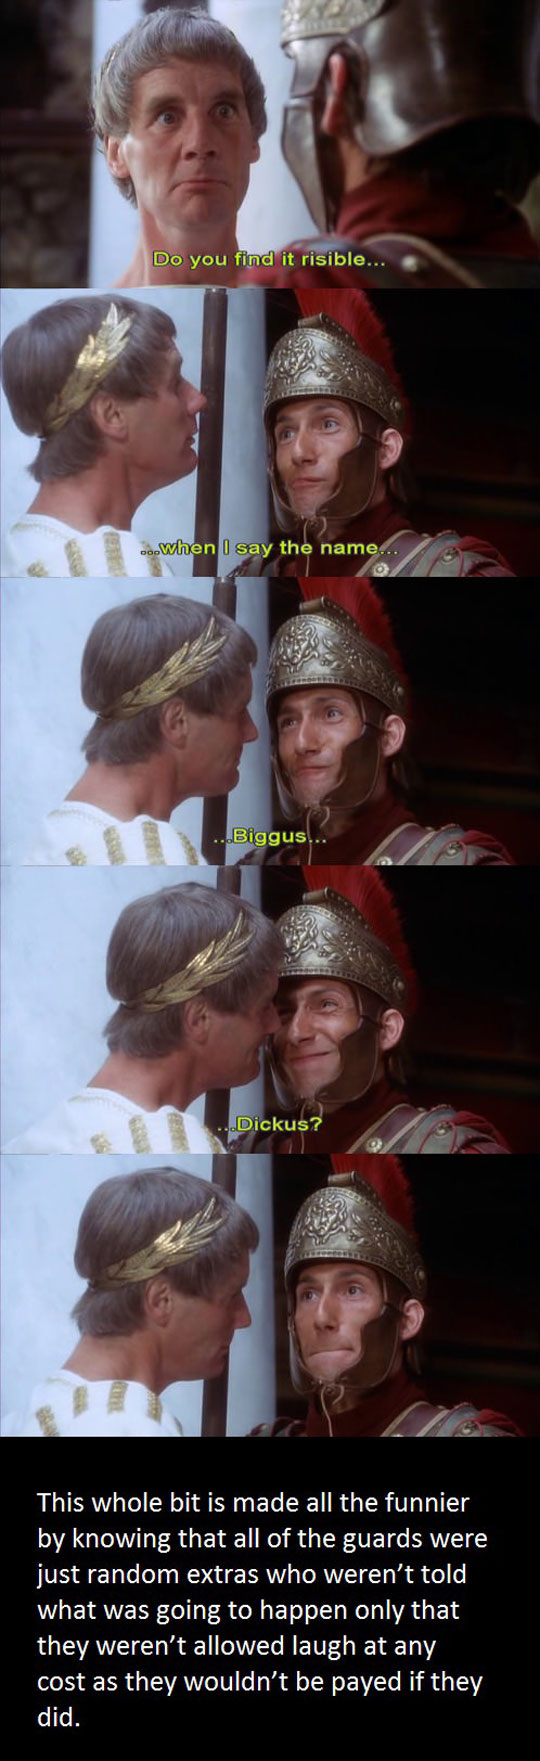 Why Monty Python Was So Great